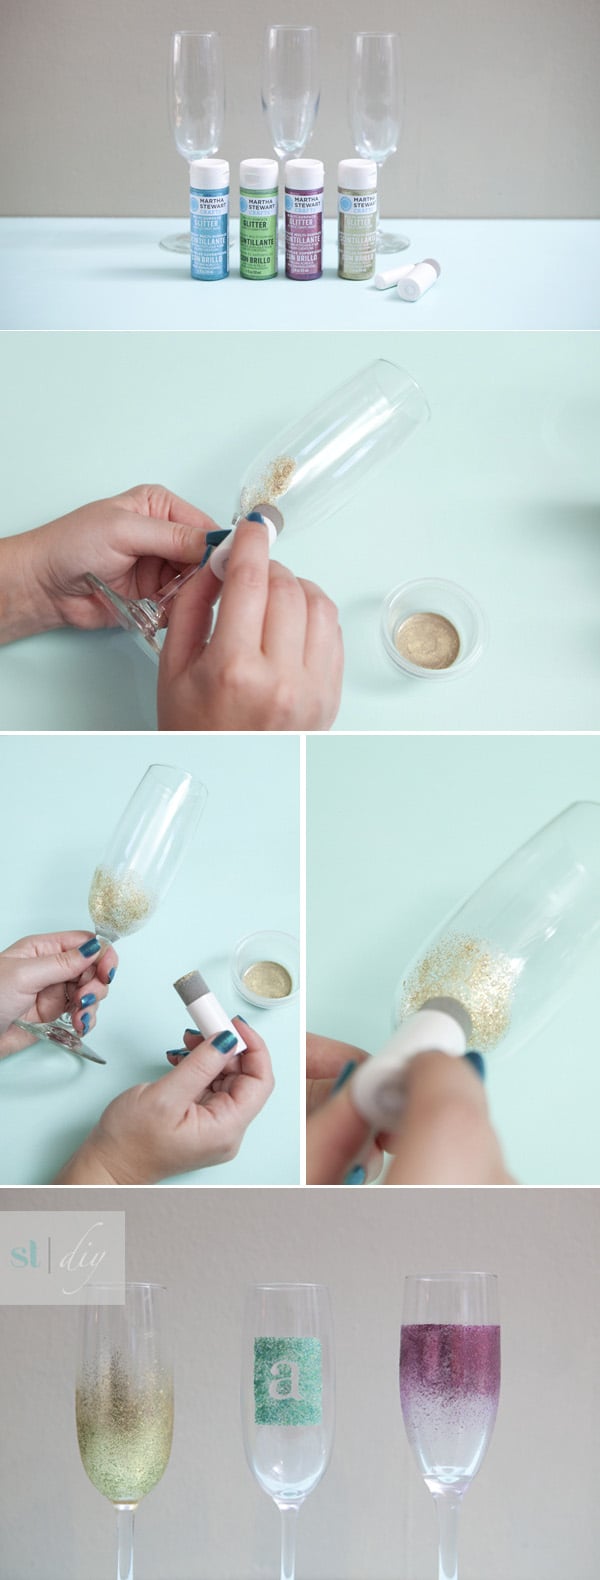 20 Creative and Interesting Things You Can Do with Wine Glasses (5)